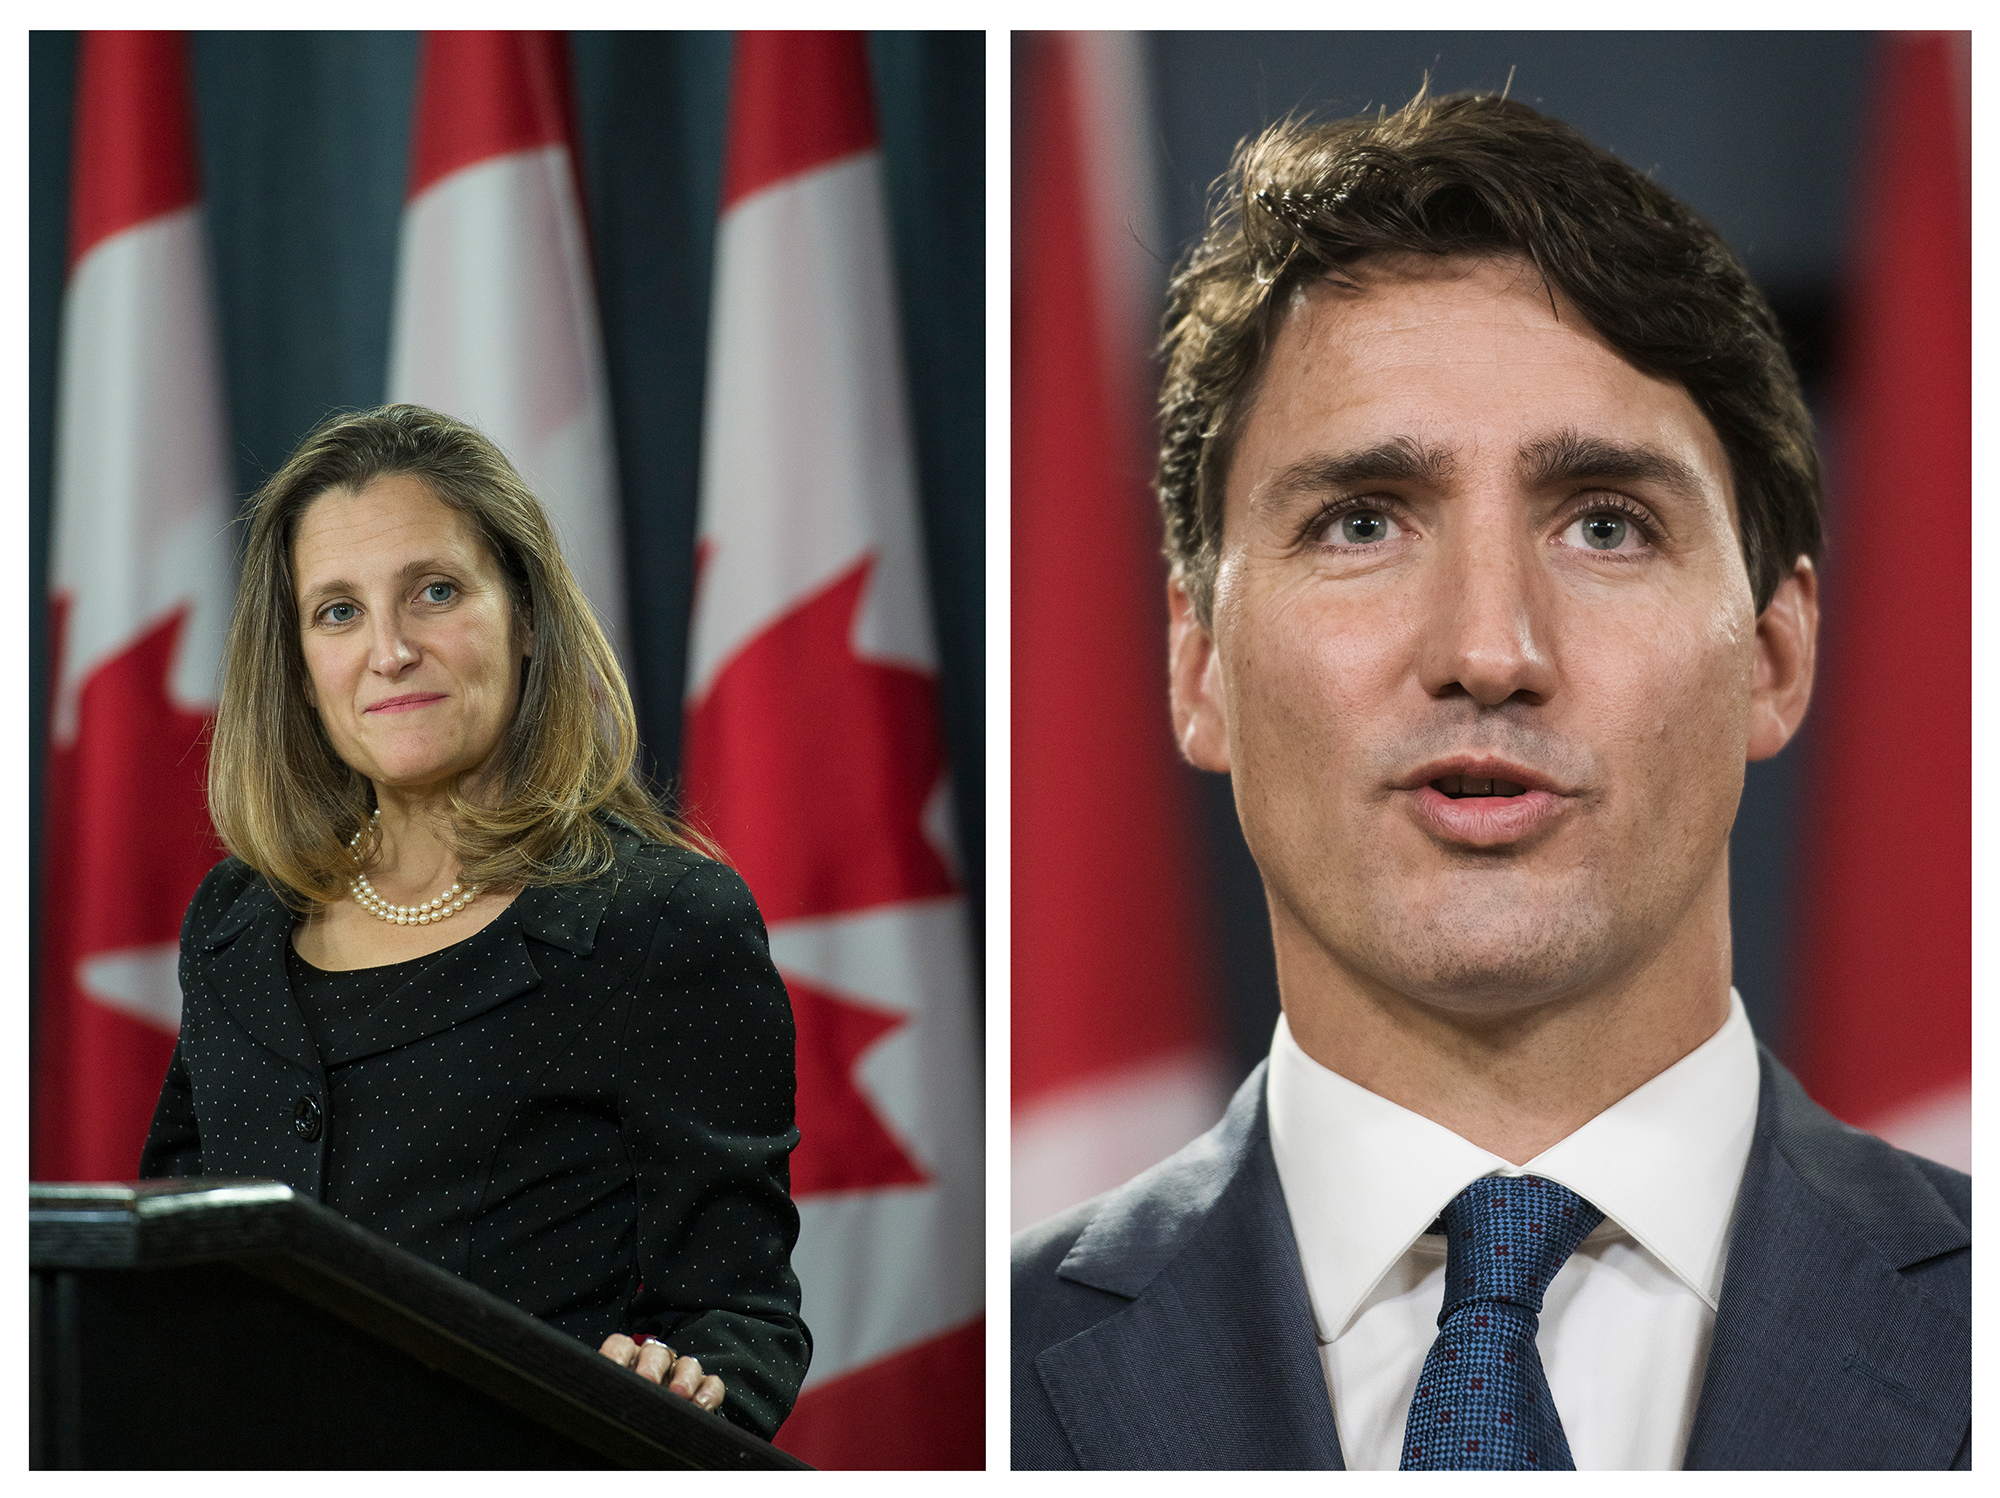  Minister of foreign affairs Chrystia Freeland and Prime Minister Justin Trudeau holds a press conference after the NAFTA negotiations with the United States. On assignment for Maclean’s. Unpublished. 